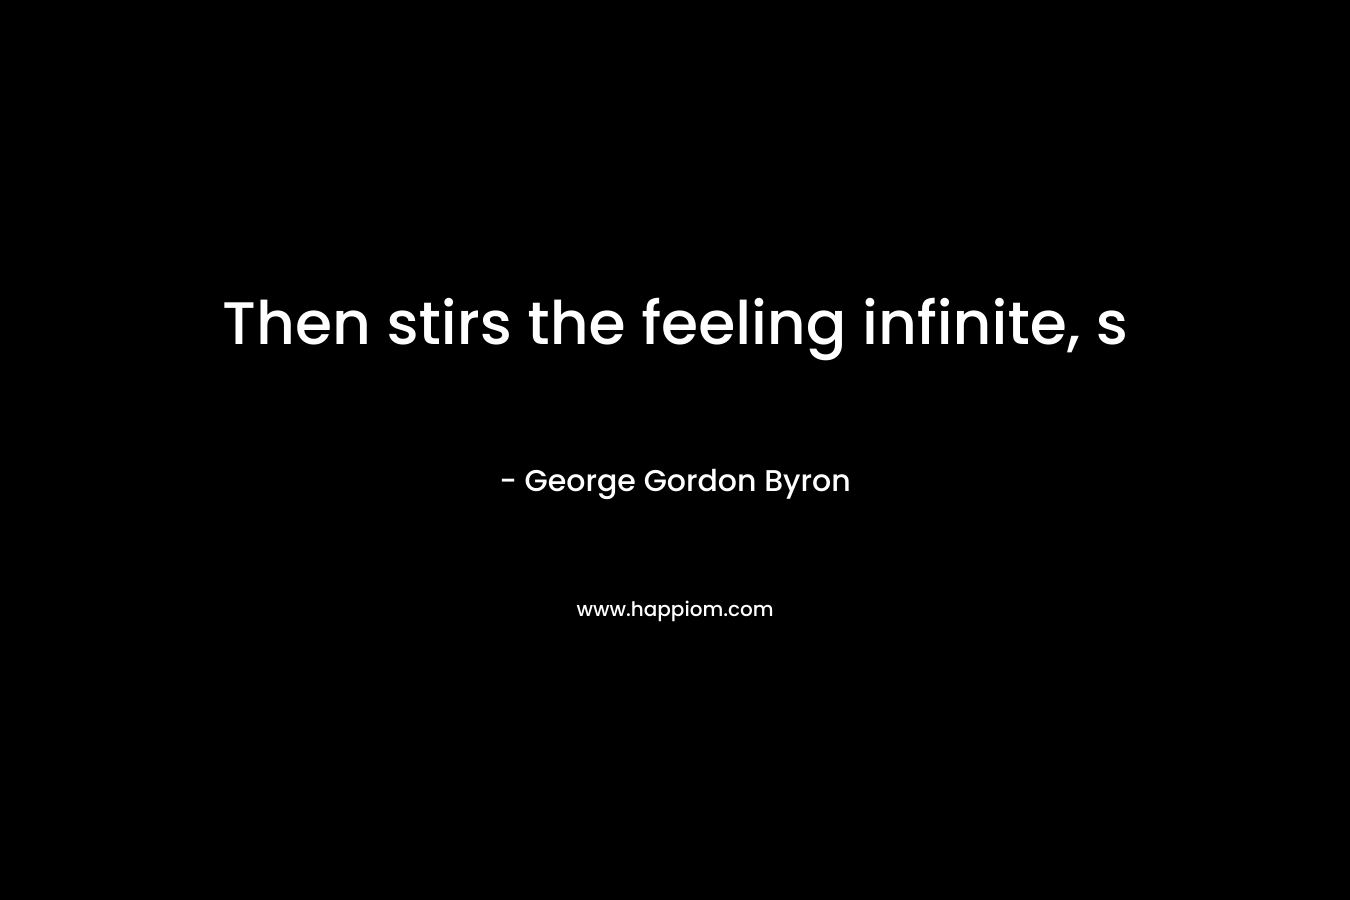 Then stirs the feeling infinite, s